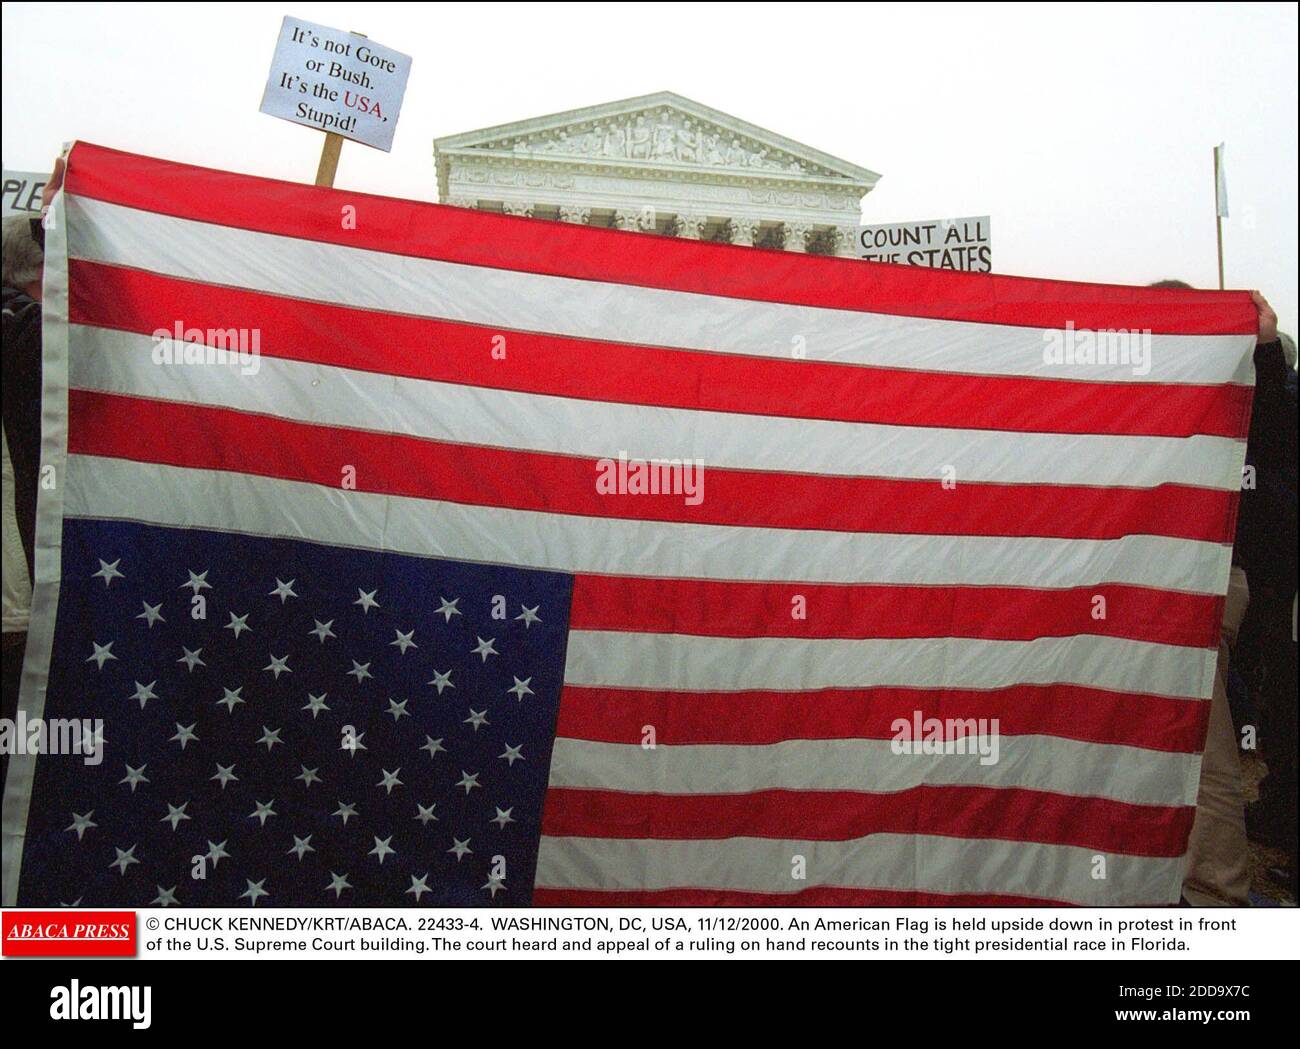 NO FILM, NO VIDEO, NO TV, NO DOCUMENTARY - KRT US NEWS STORY SLUGGED: ELN-PRESIDENT KRT PHOTO BY PETE SOUZA/CHICAGO TRIBUNE (December 11) WASHINGTON, DC -- An American Flag is held upside down in protest in front of the U.S. Supreme Court building Monday, December 11, 2000. The court heard and app Stock Photo